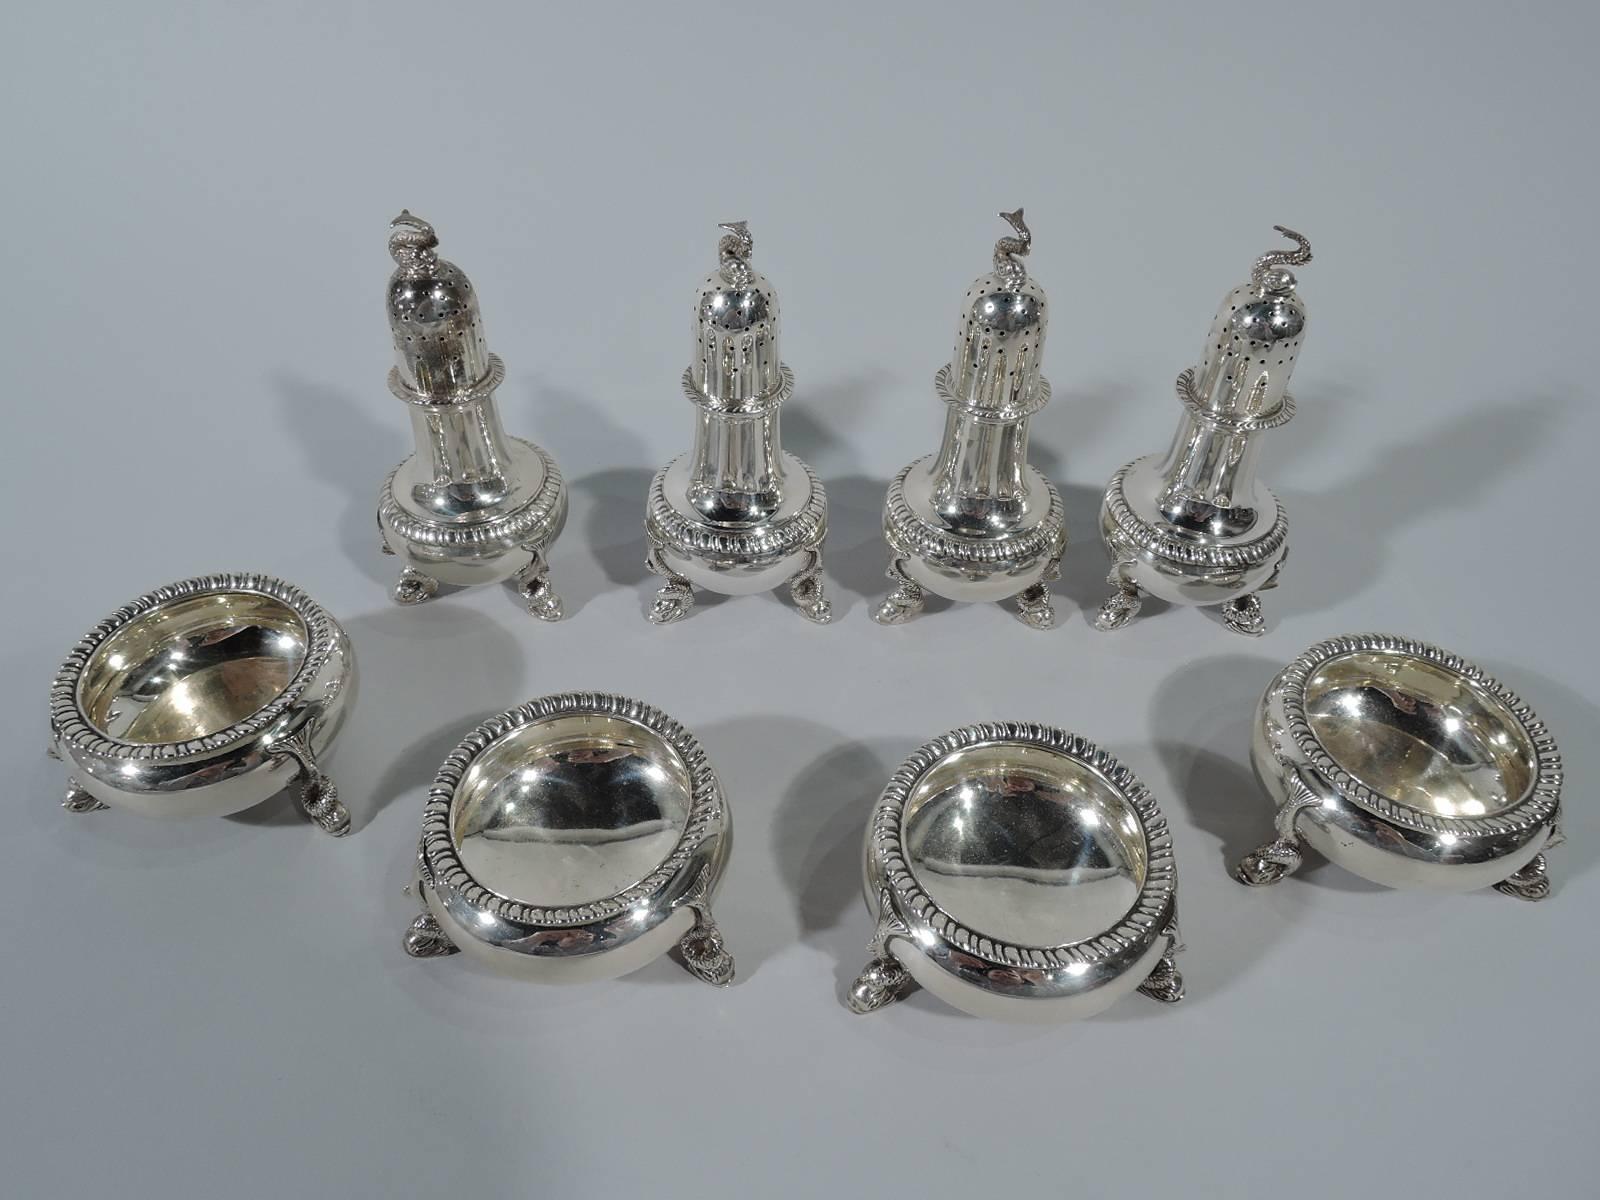 Four pairs of sterling silver open salts and pepper shakers. Made by Tuttle in Boston, 1929-1930. Each salt: Bellied bowl with gadrooned rim and three dolphin supports. Each pepper: Baluster with pierced domed cover, gadrooning, and three dolphin